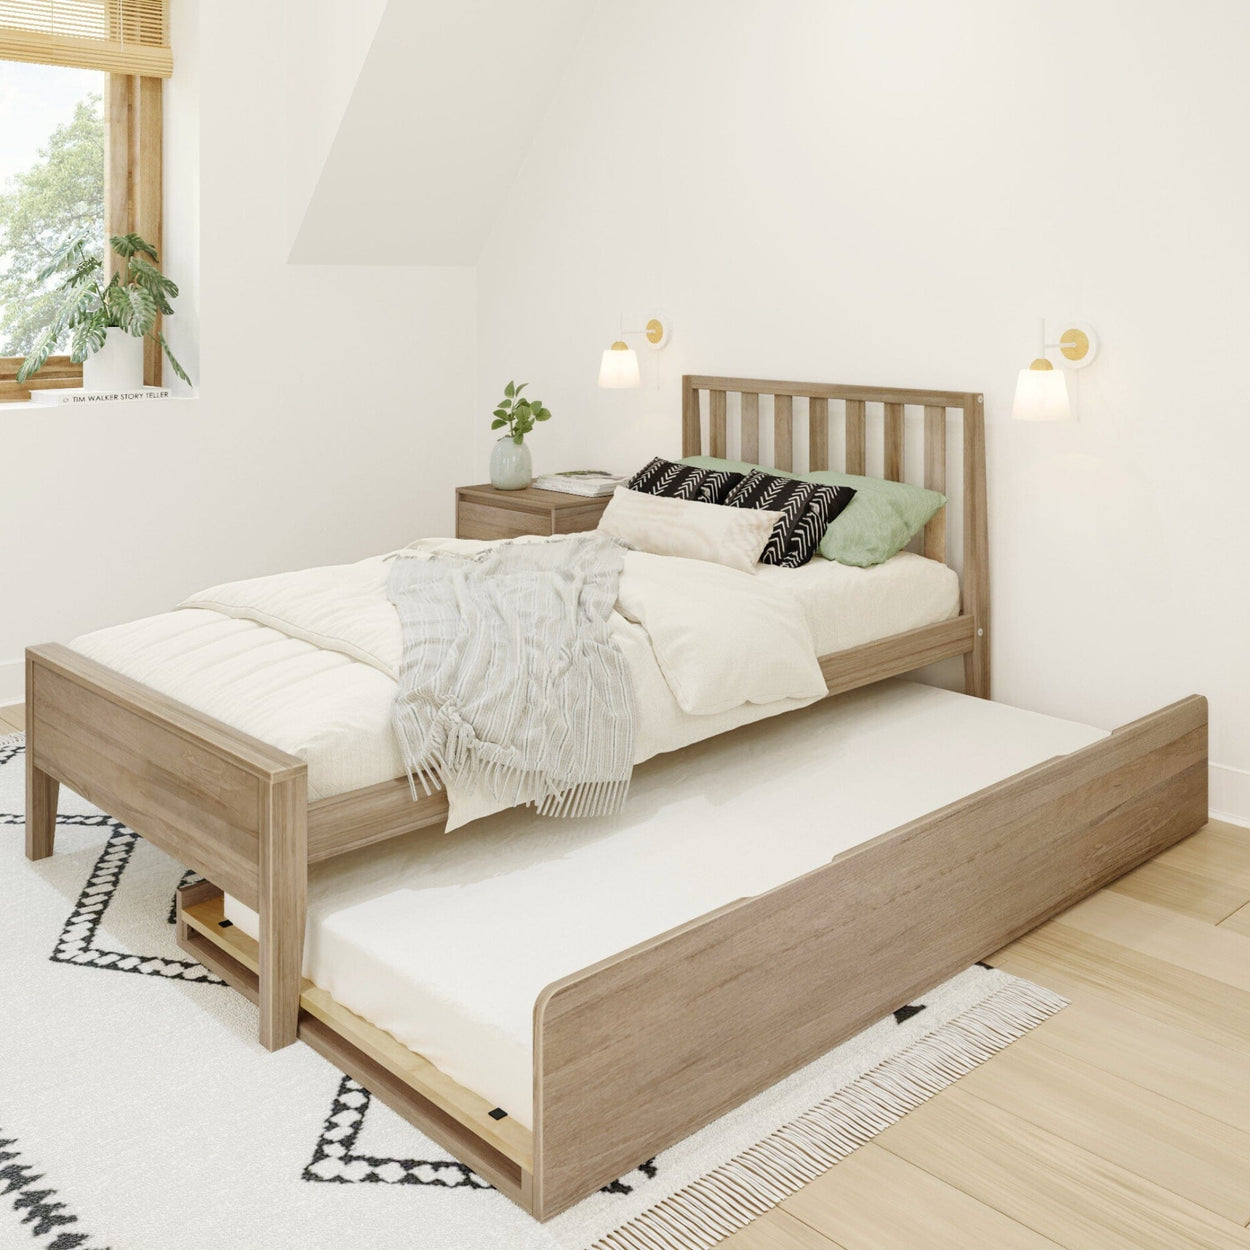 216210-010 : Kids Beds Scandinavian Twin-Size Bed with Twin-Size Trundle, Blonde